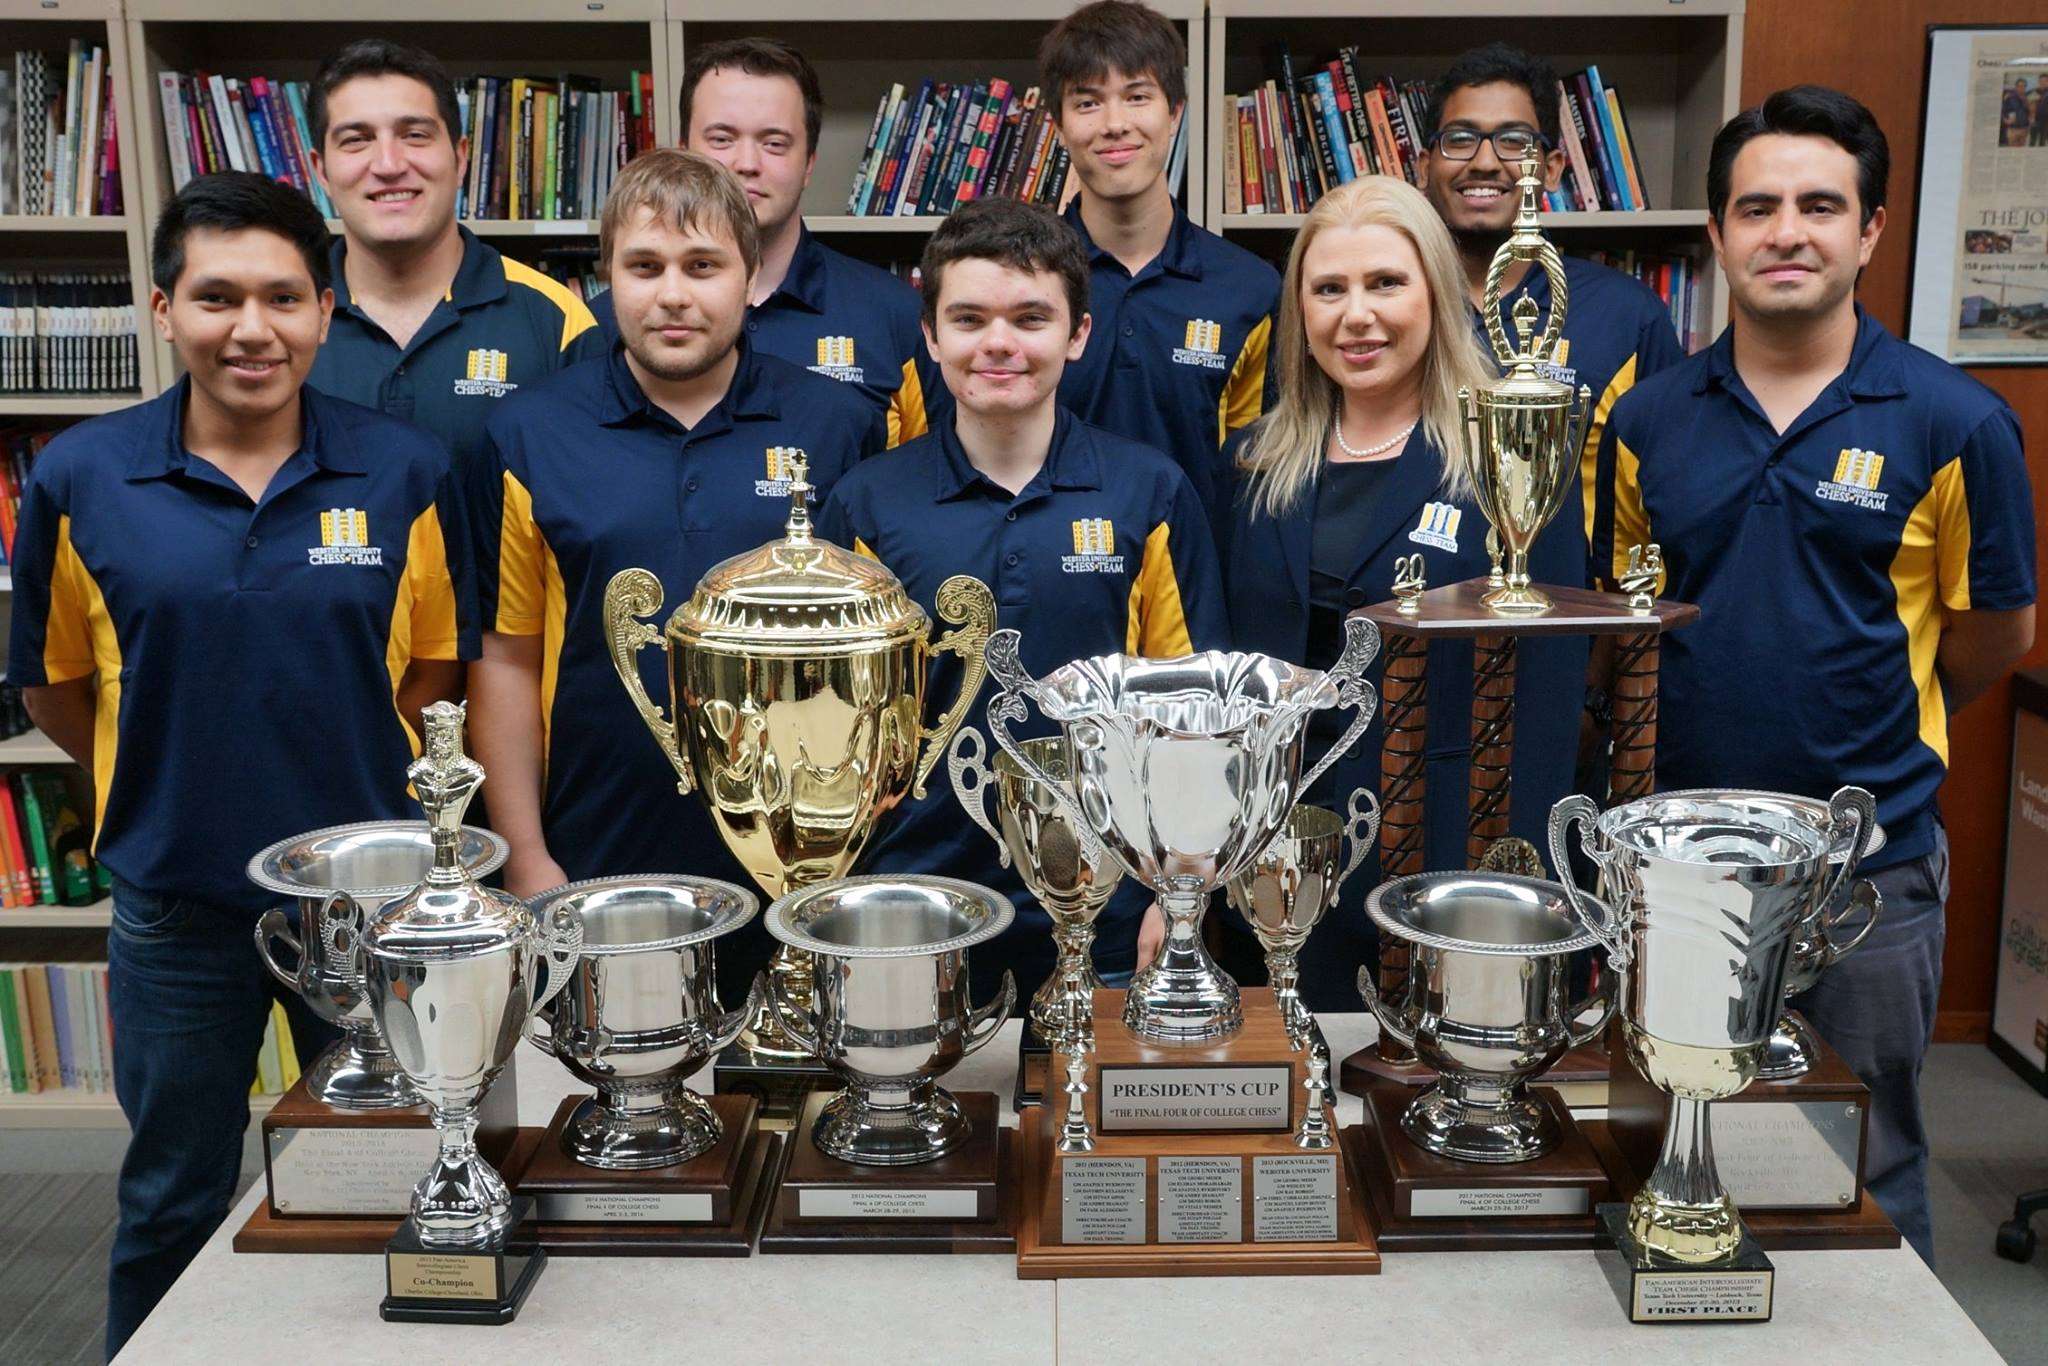 GM Priyadharshan Kannappan founder of Chess Gaja with his Webster University Teammates and coach GM Susan Polgar with the trophies won by the team